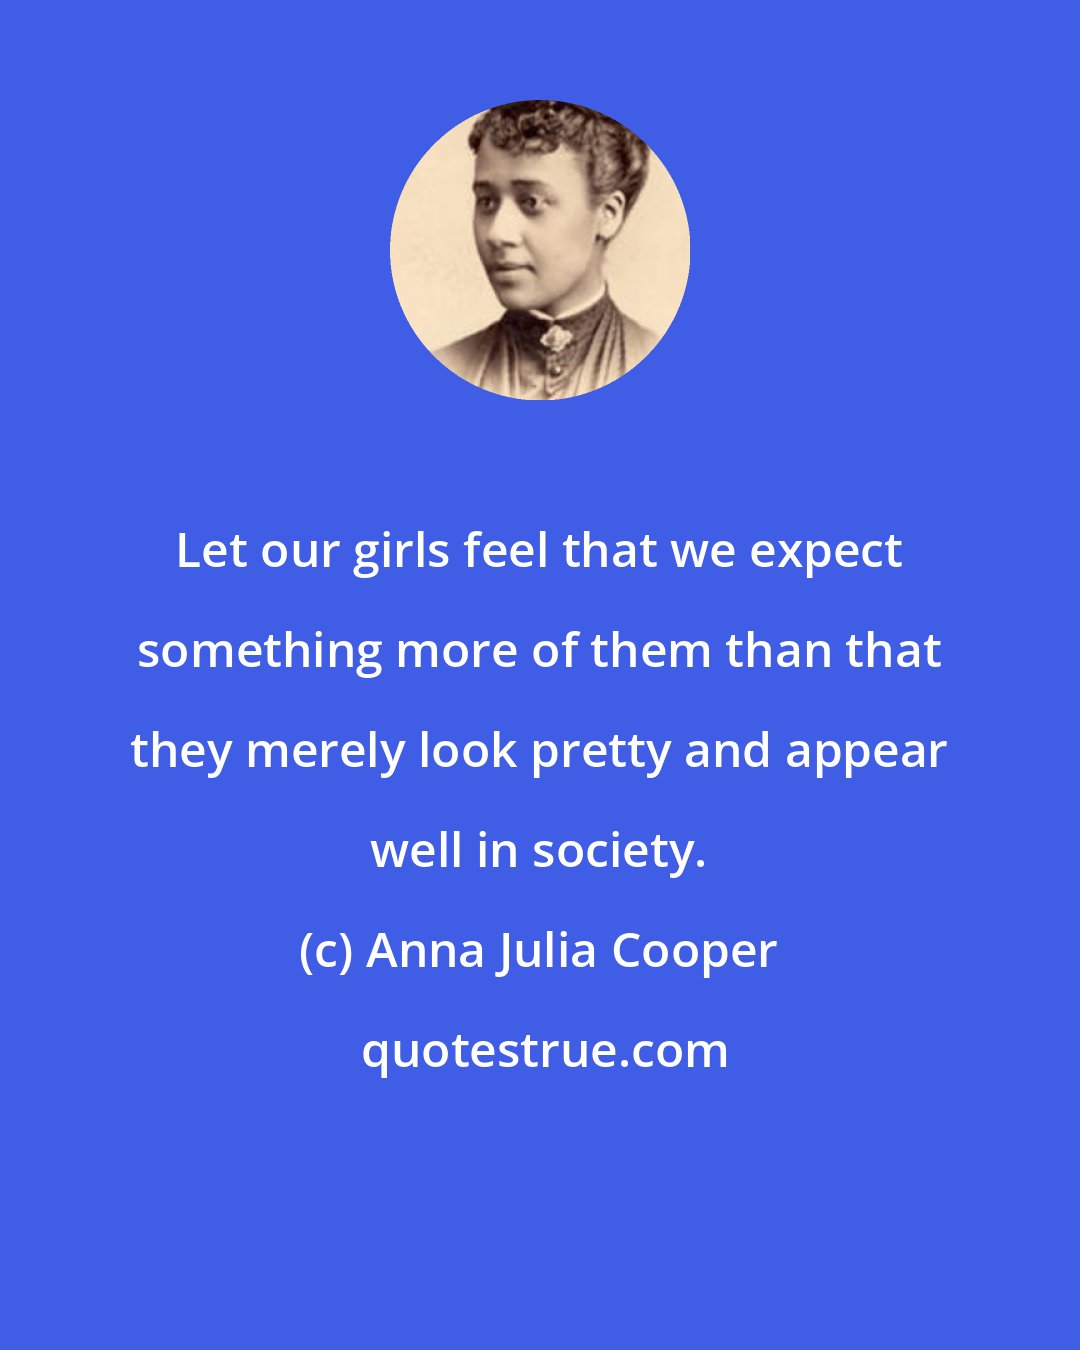 Anna Julia Cooper: Let our girls feel that we expect something more of them than that they merely look pretty and appear well in society.